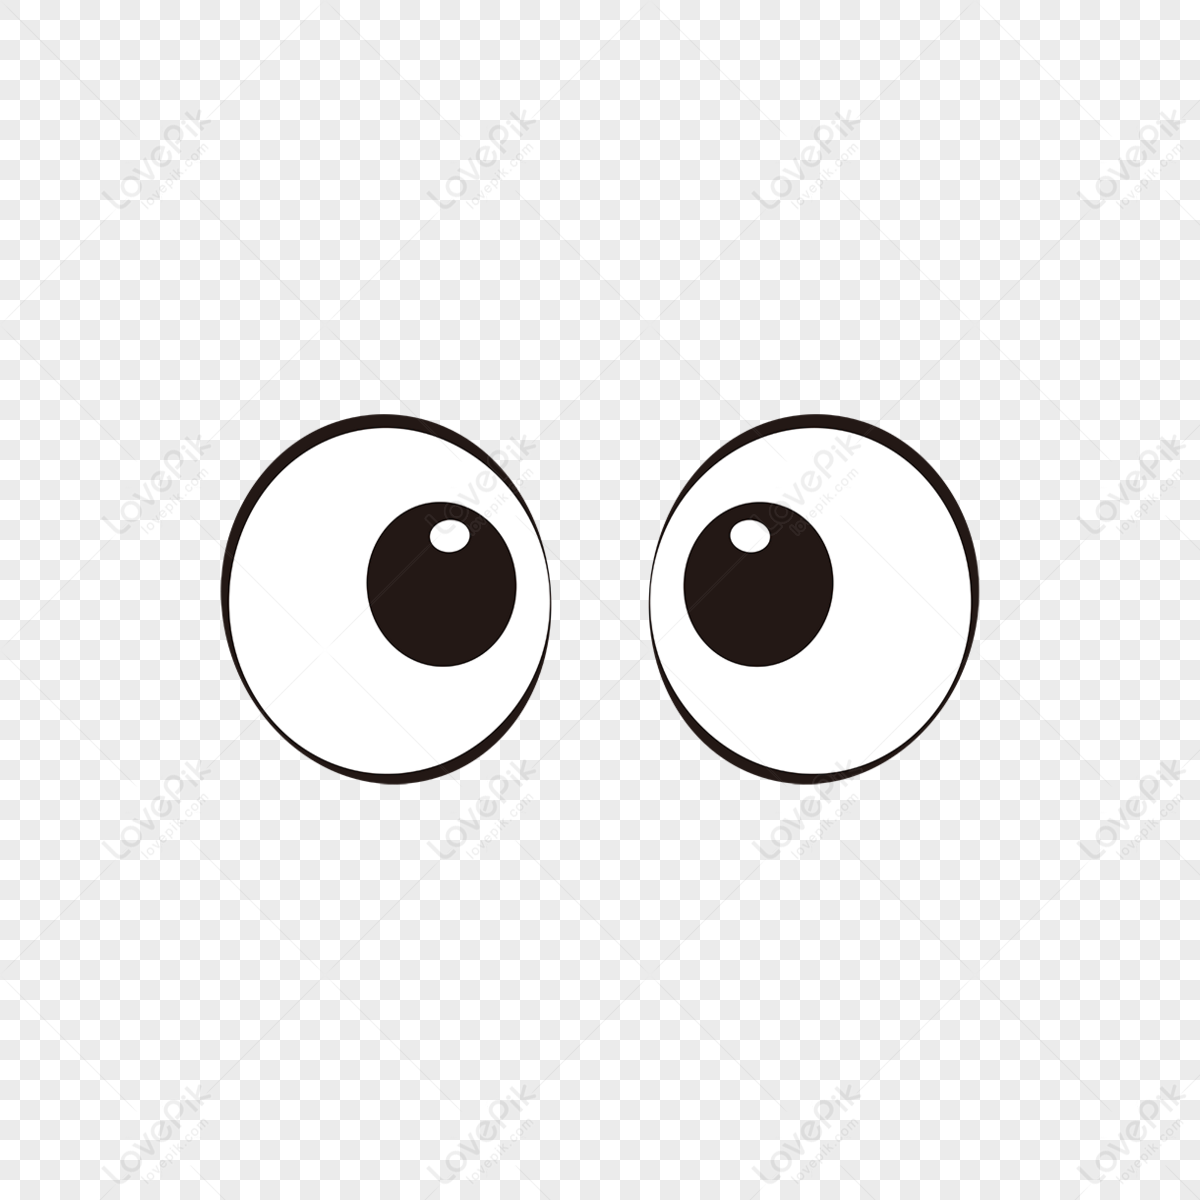 Cartoon simple cute round eyes material eyes clipart anime eyes,expression,animal eyes png free download